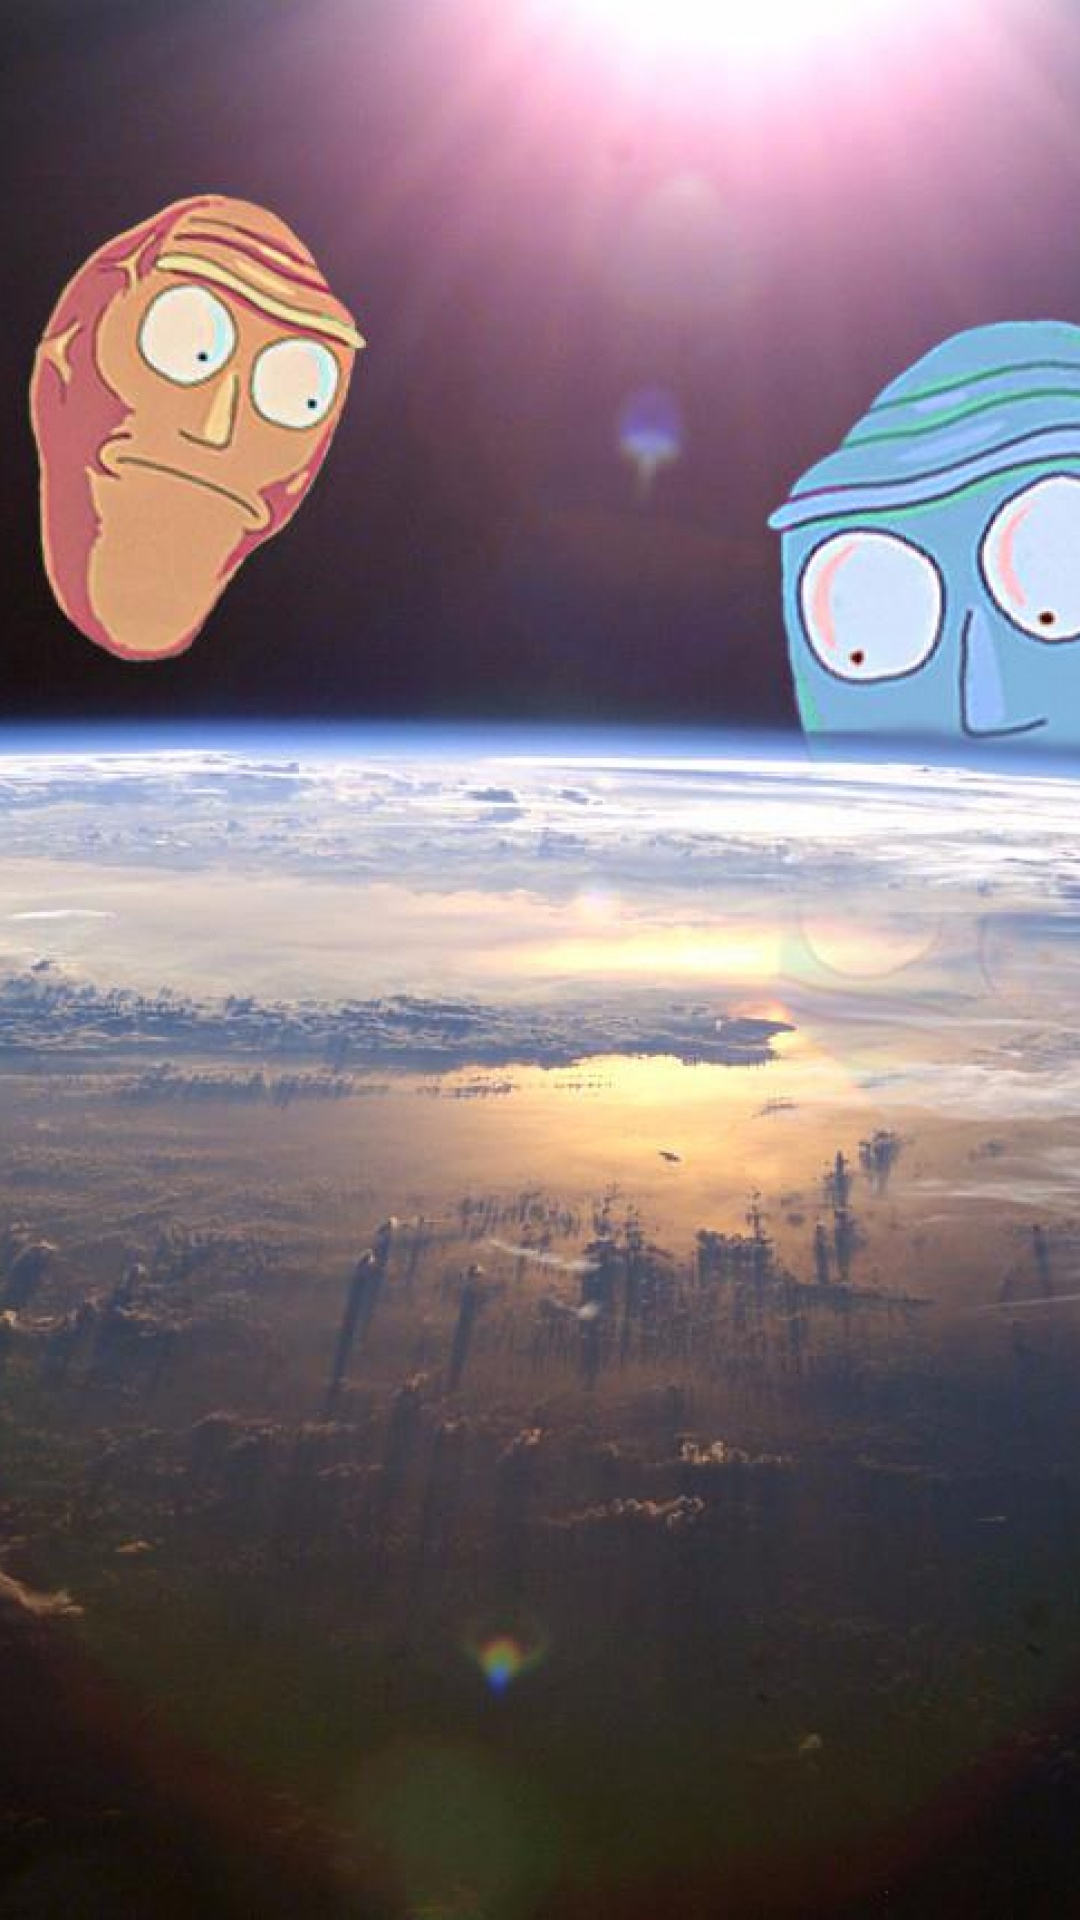 rick and morty wallpaper phone,sky,cartoon,atmosphere,illustration,animation